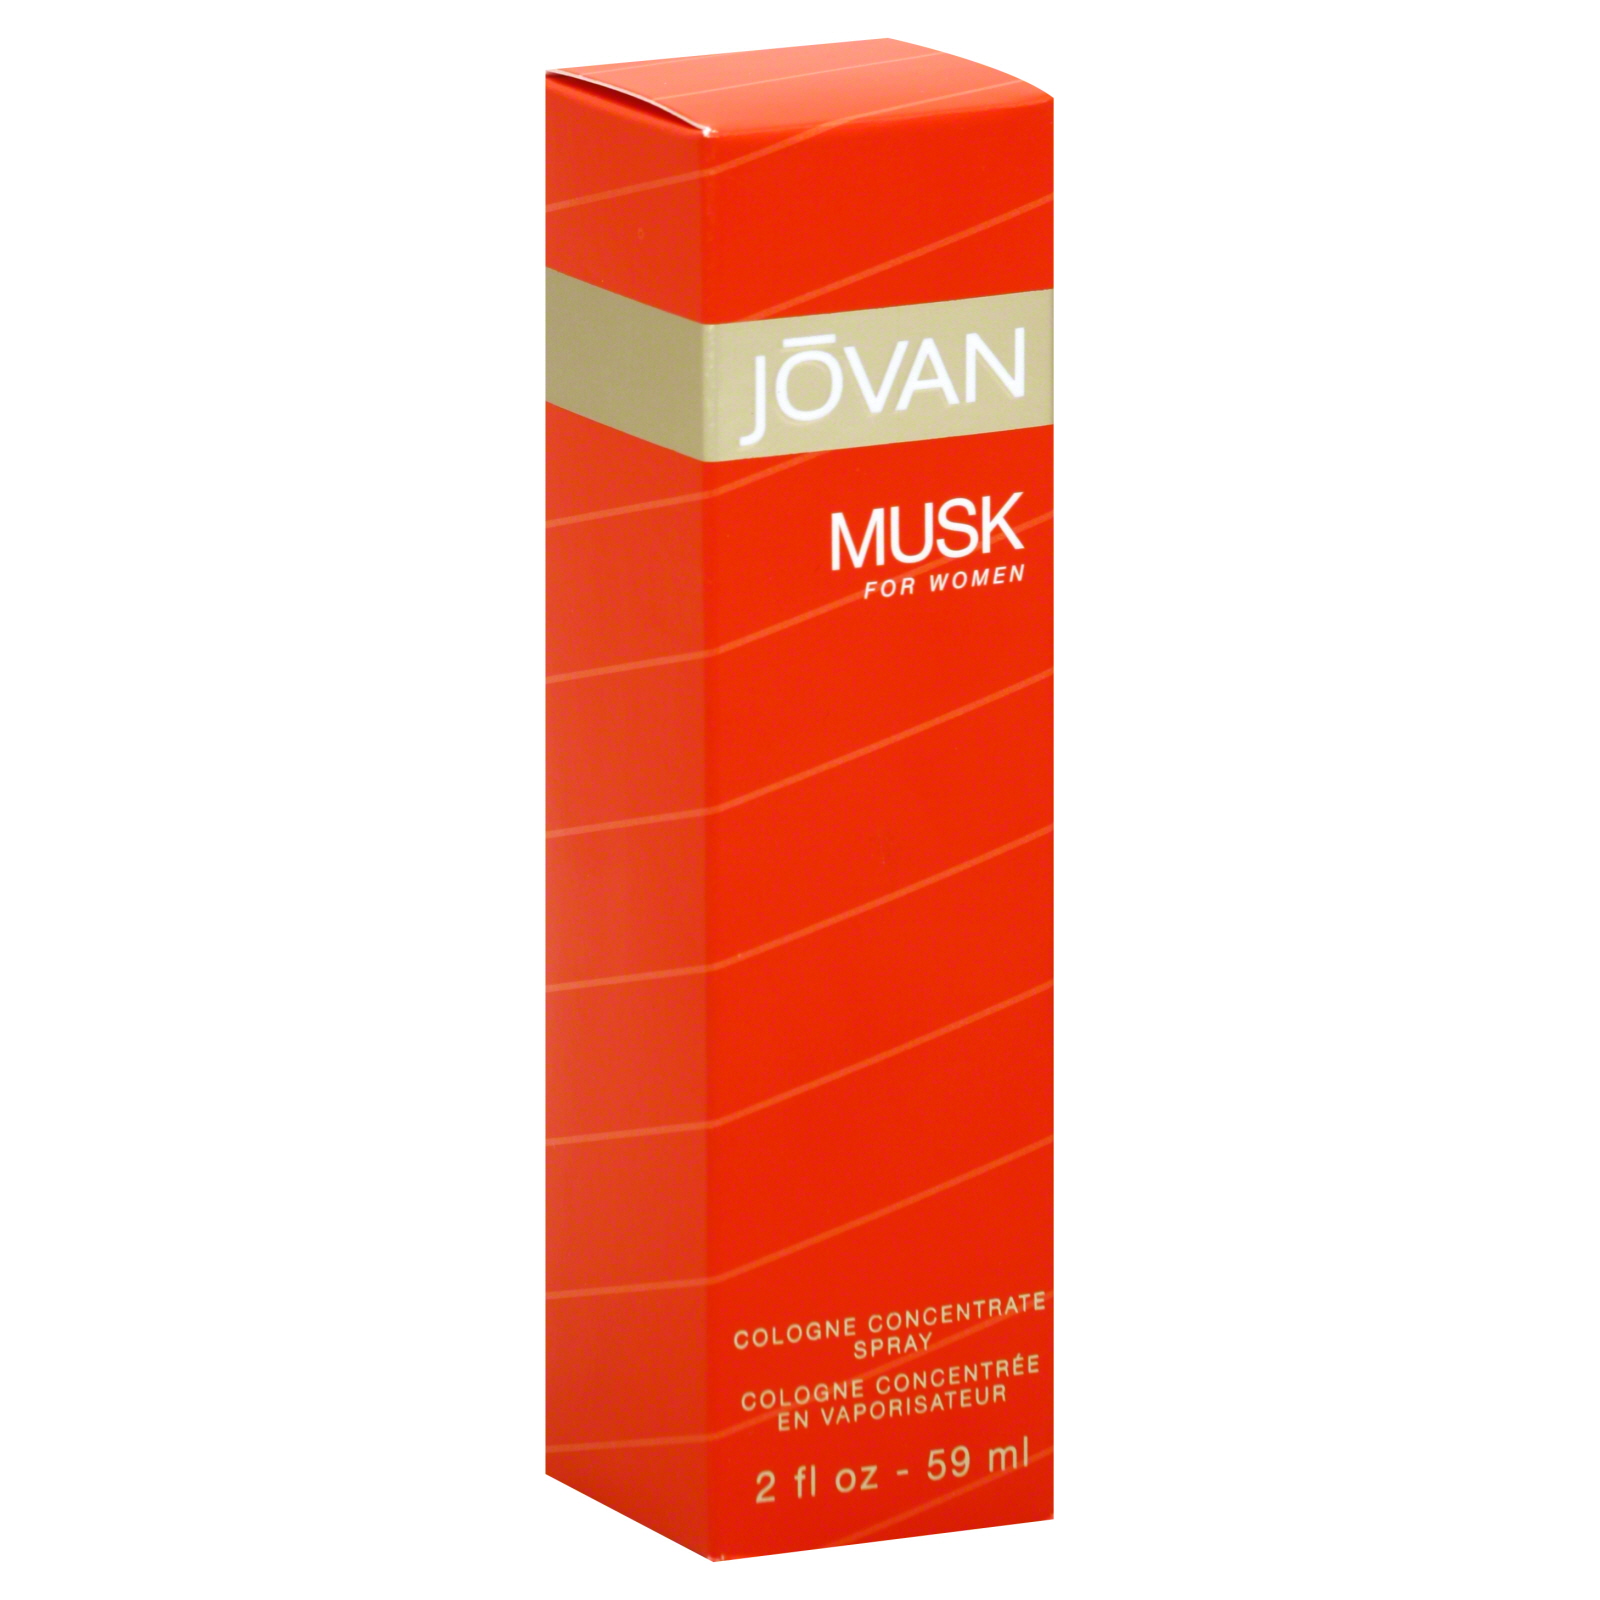 Jovan Musk Cologne Concentrate Spray, for Women, 2 fl oz (59 ml)